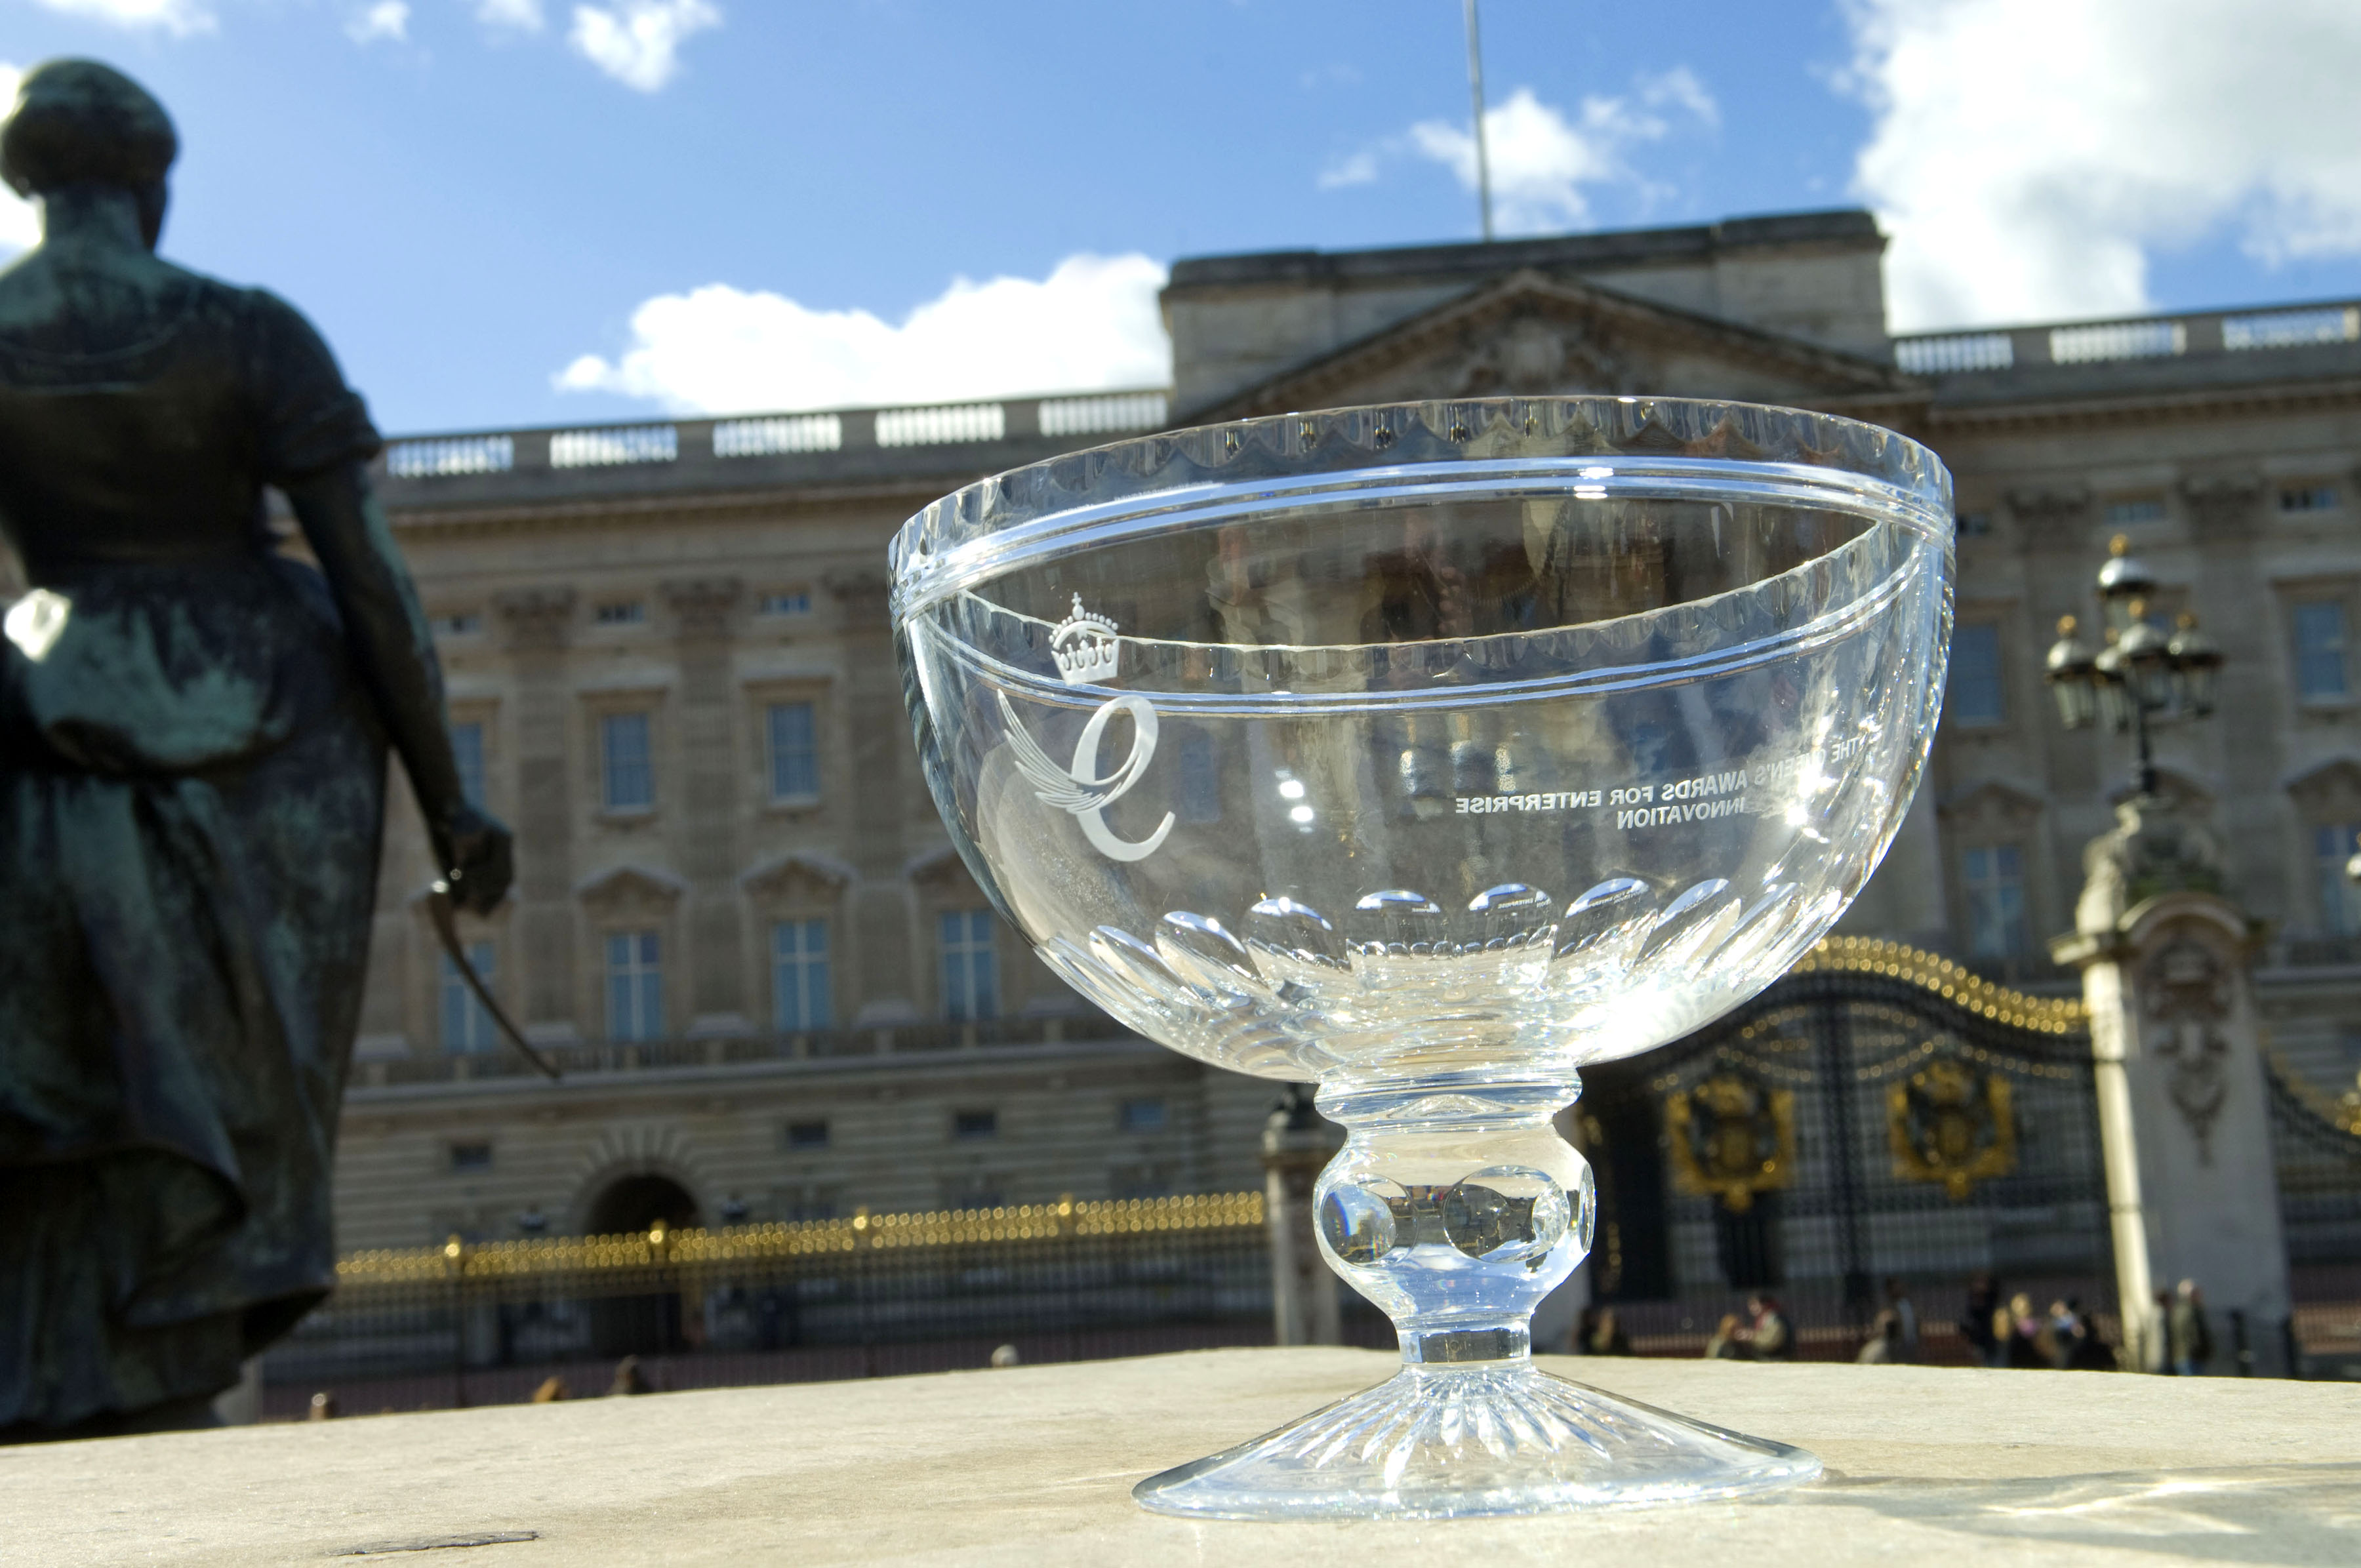 Queens Awards bowl at Buckingham Palace